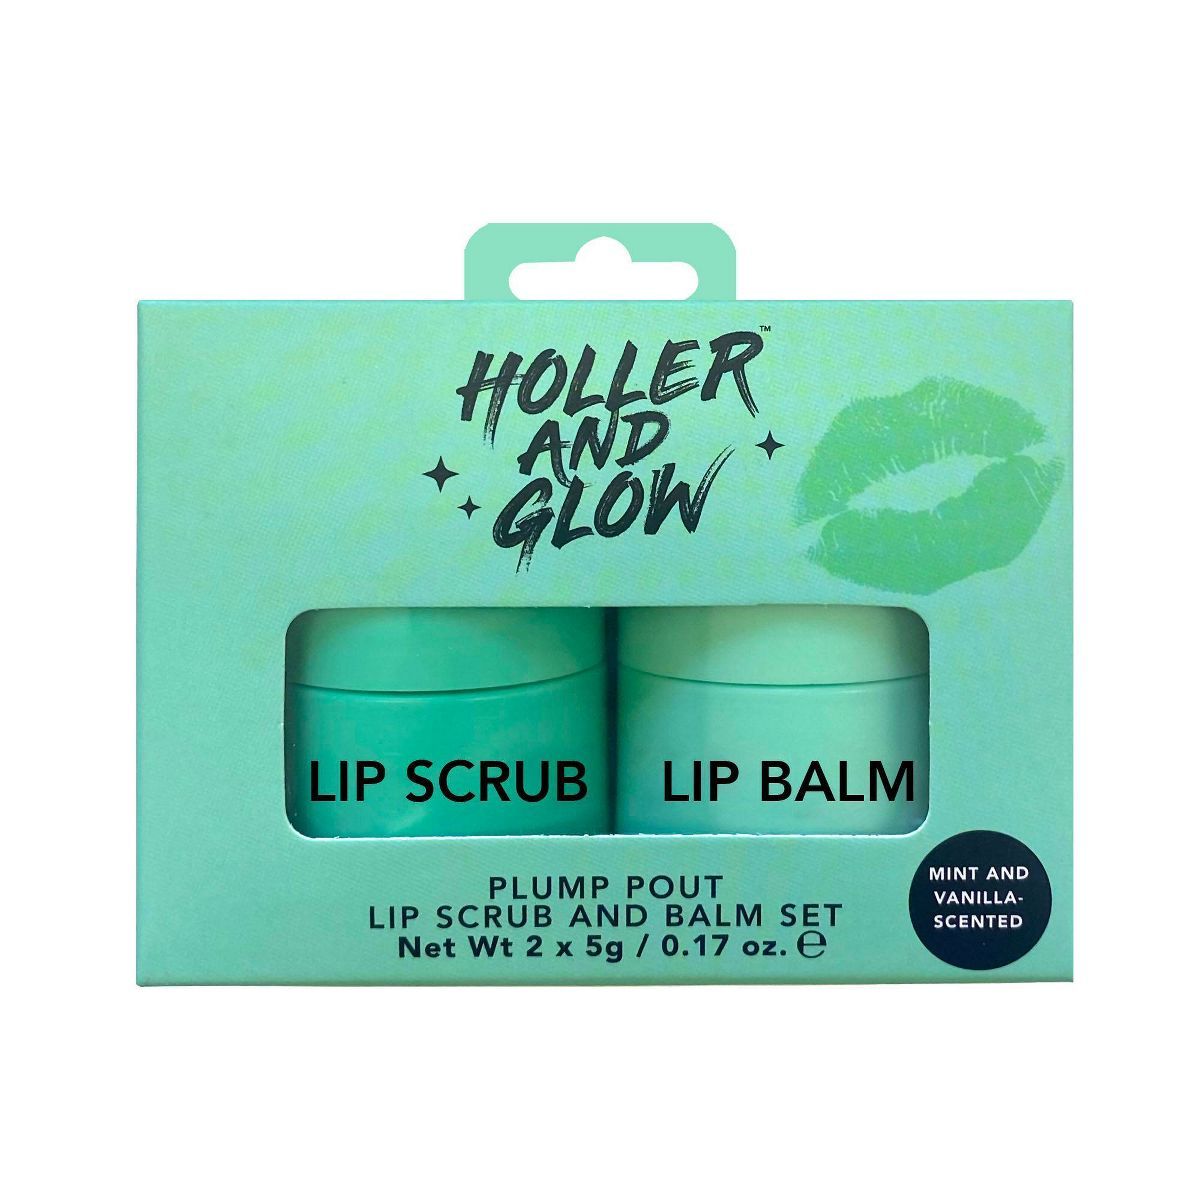 Holler and Glow Plump Pout Lip Scrub and Balm Set - Mint and Vanilla - 0.17oz/2ct | Target